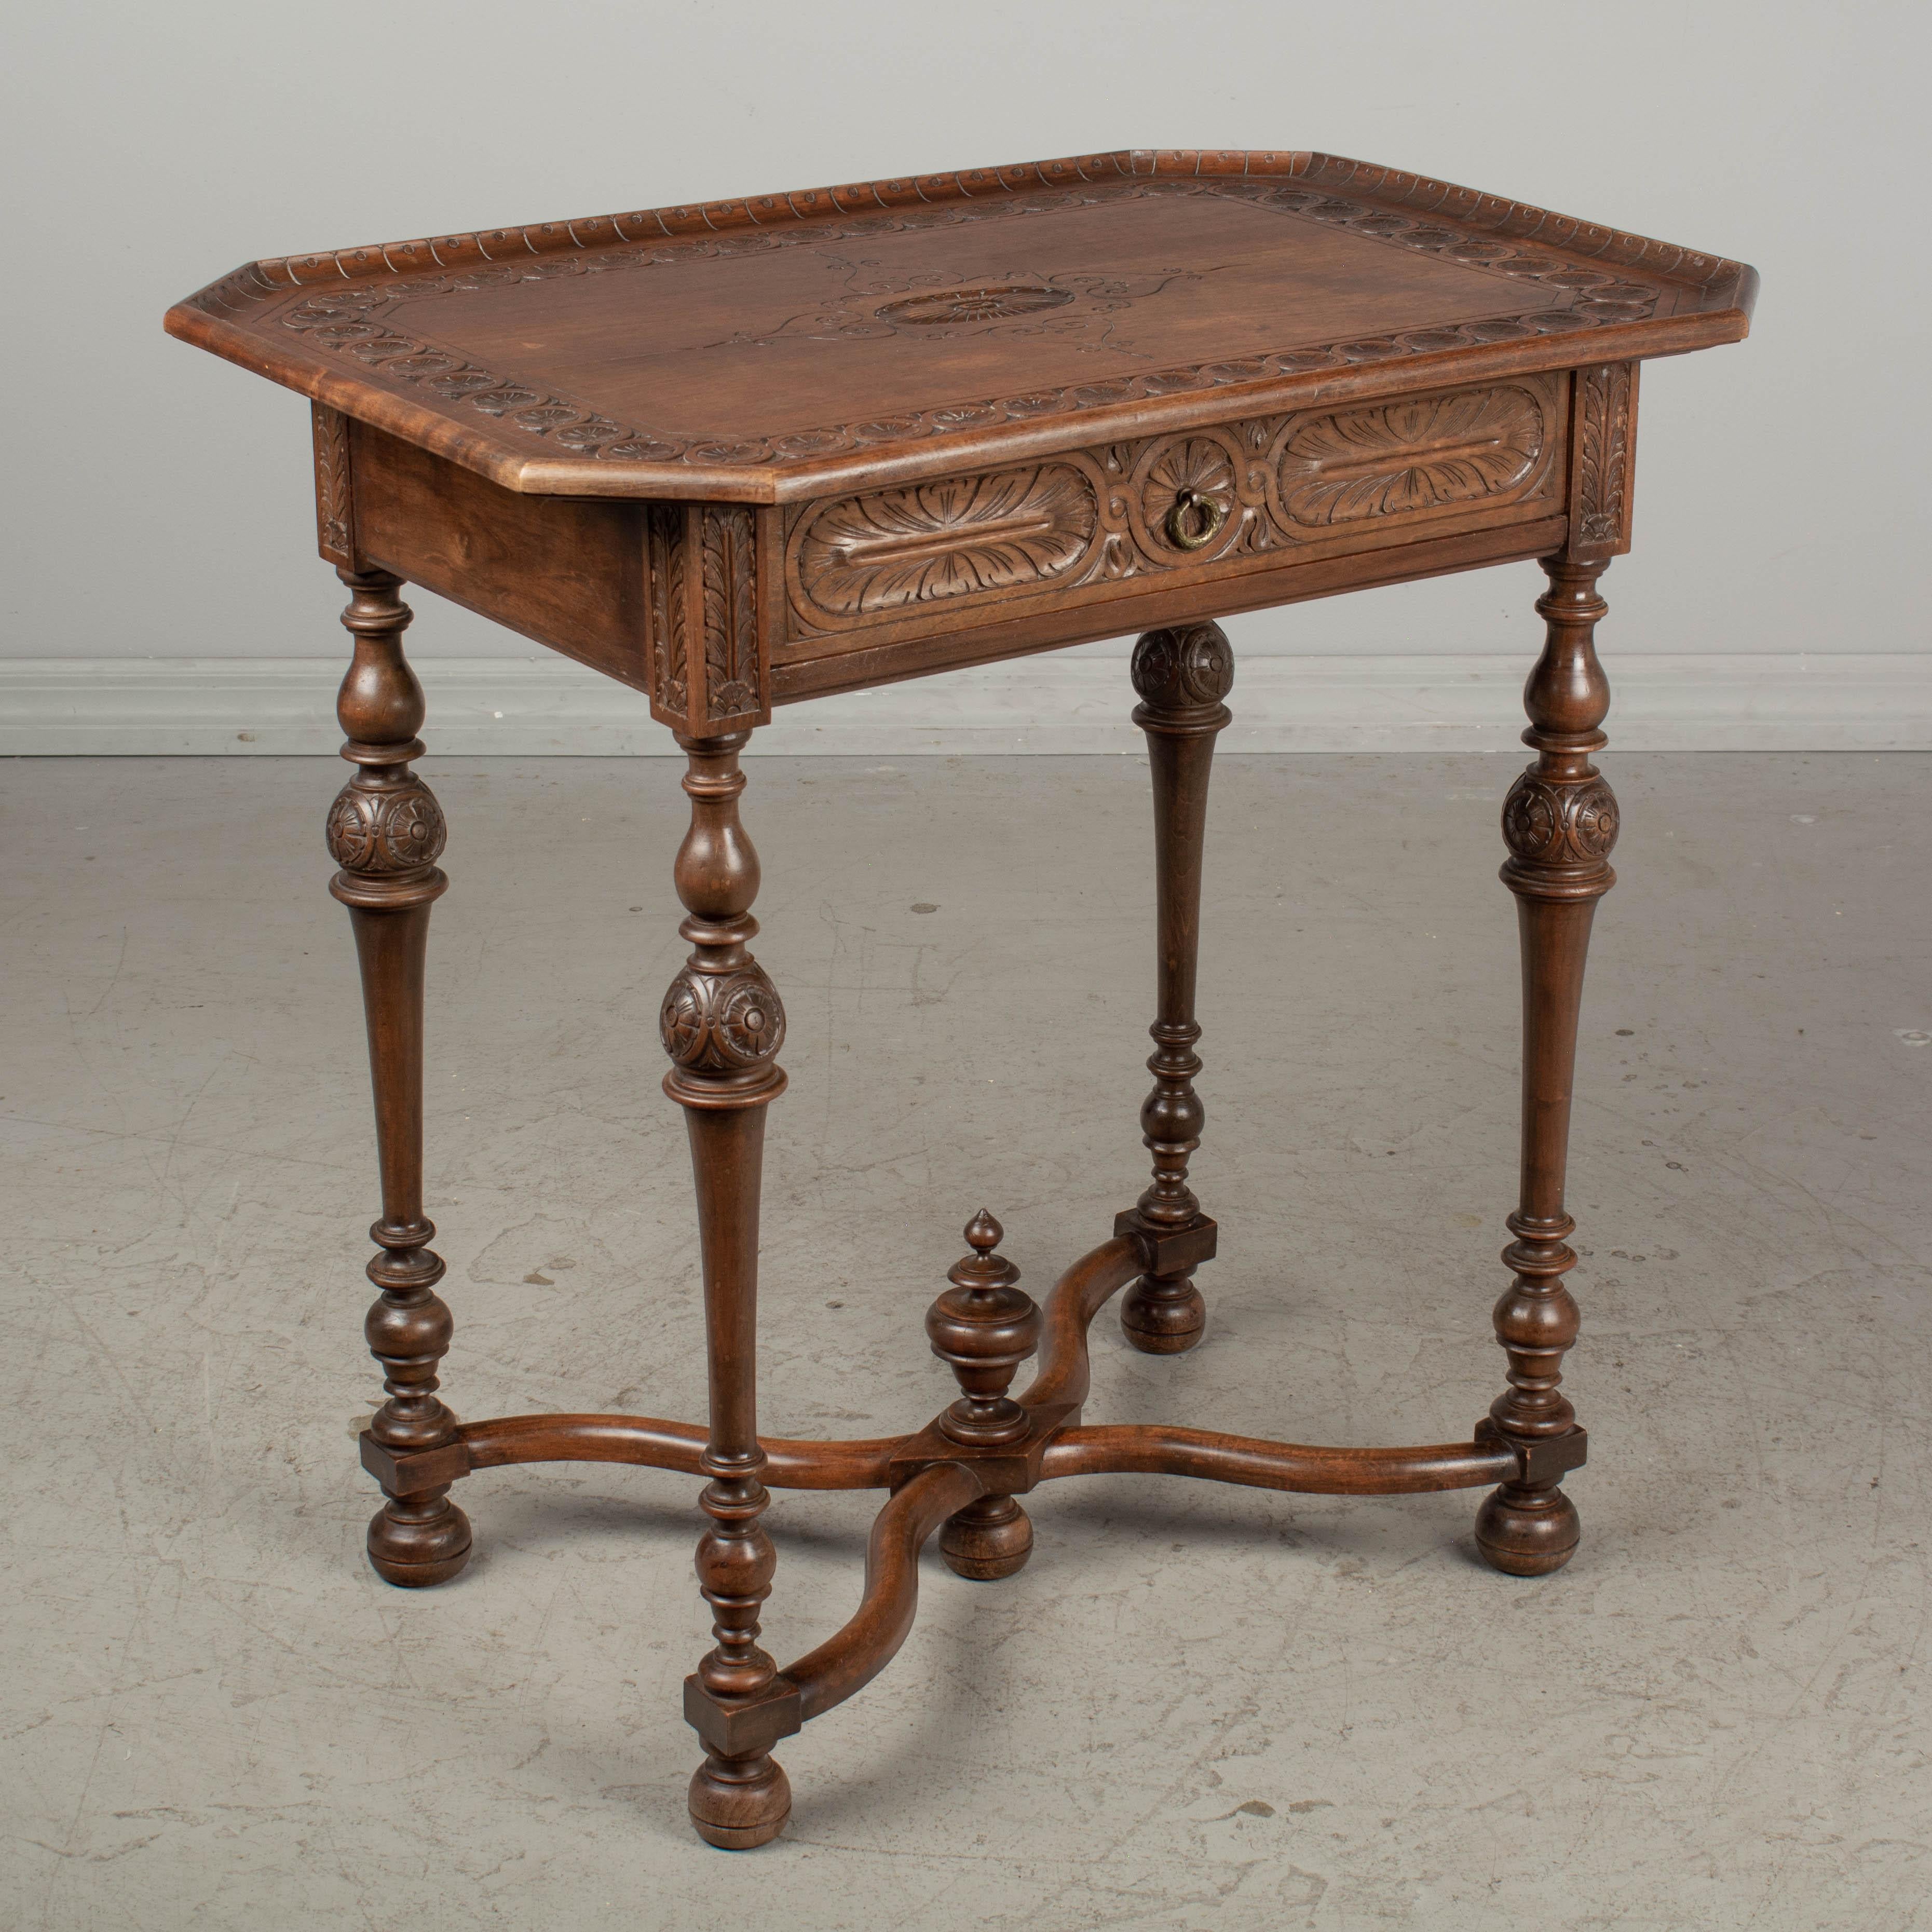 A Louis XVIII style French side table made of solid walnut with carved decoration. Dovetailed drawer with small brass ring pull. Turned legs connected by an X-form stretcher with center finial. Pegged construction. Waxed patina. 
 

 